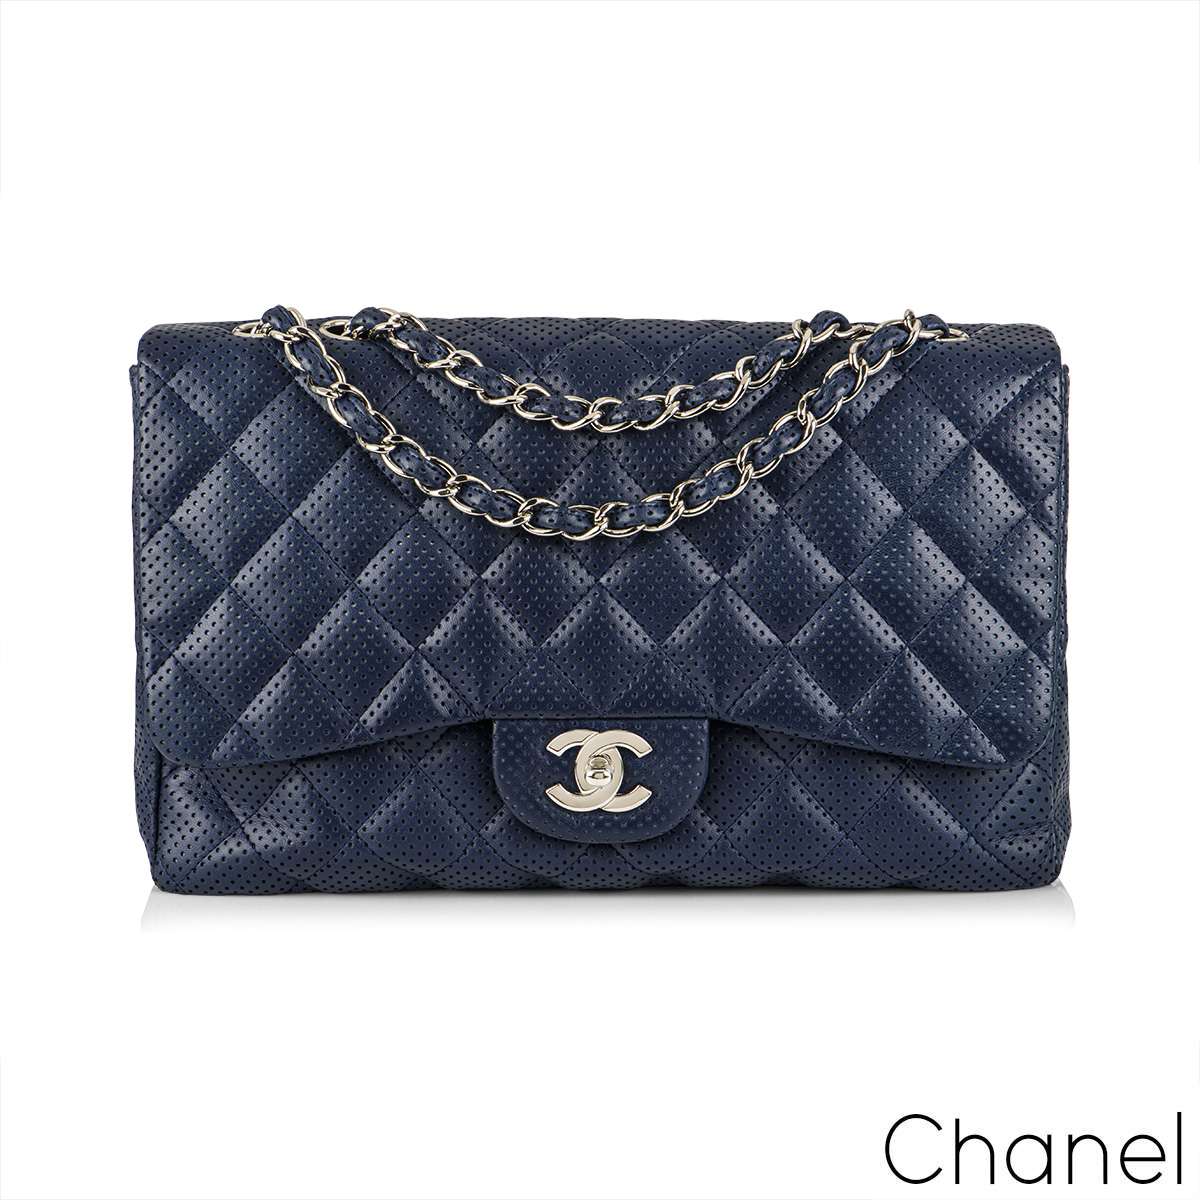 Chanel Timeless Classic 255 Large Jumbo Double Flap Bag in Black Caviar  with Gold Hardware  As New